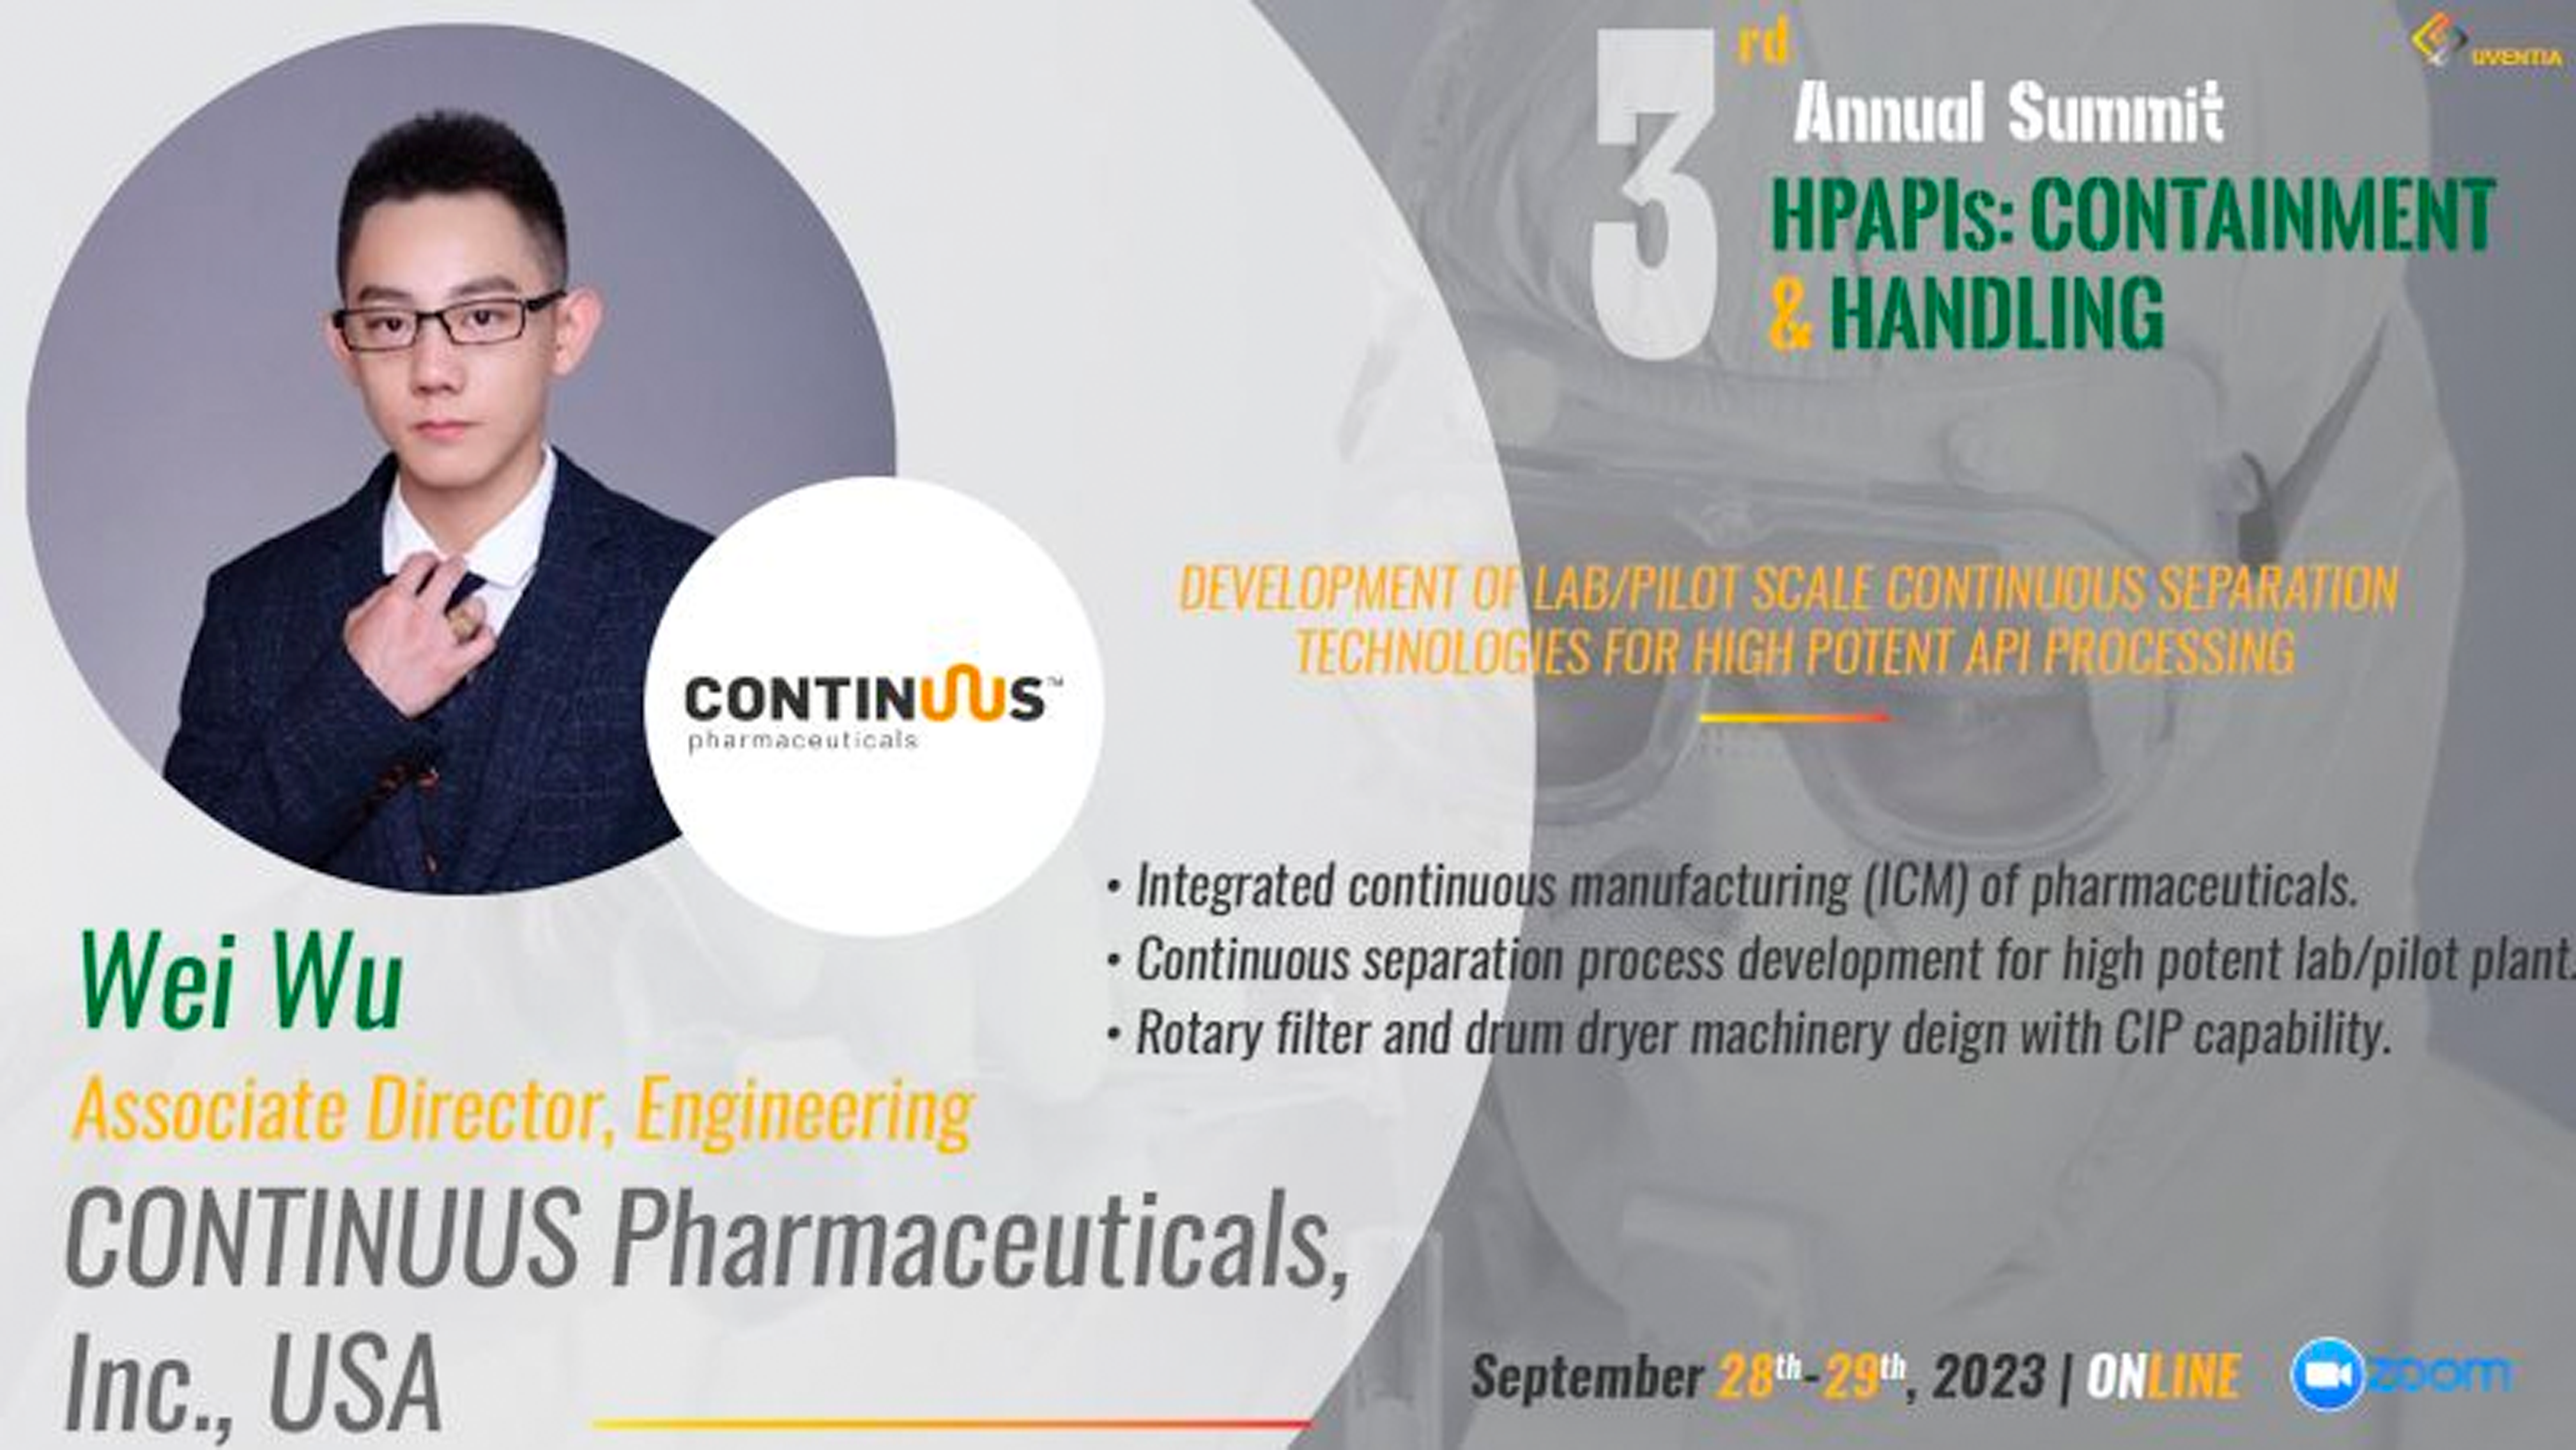 CONTINUUS is presenting at the 3rd annual HPAPIs Summit